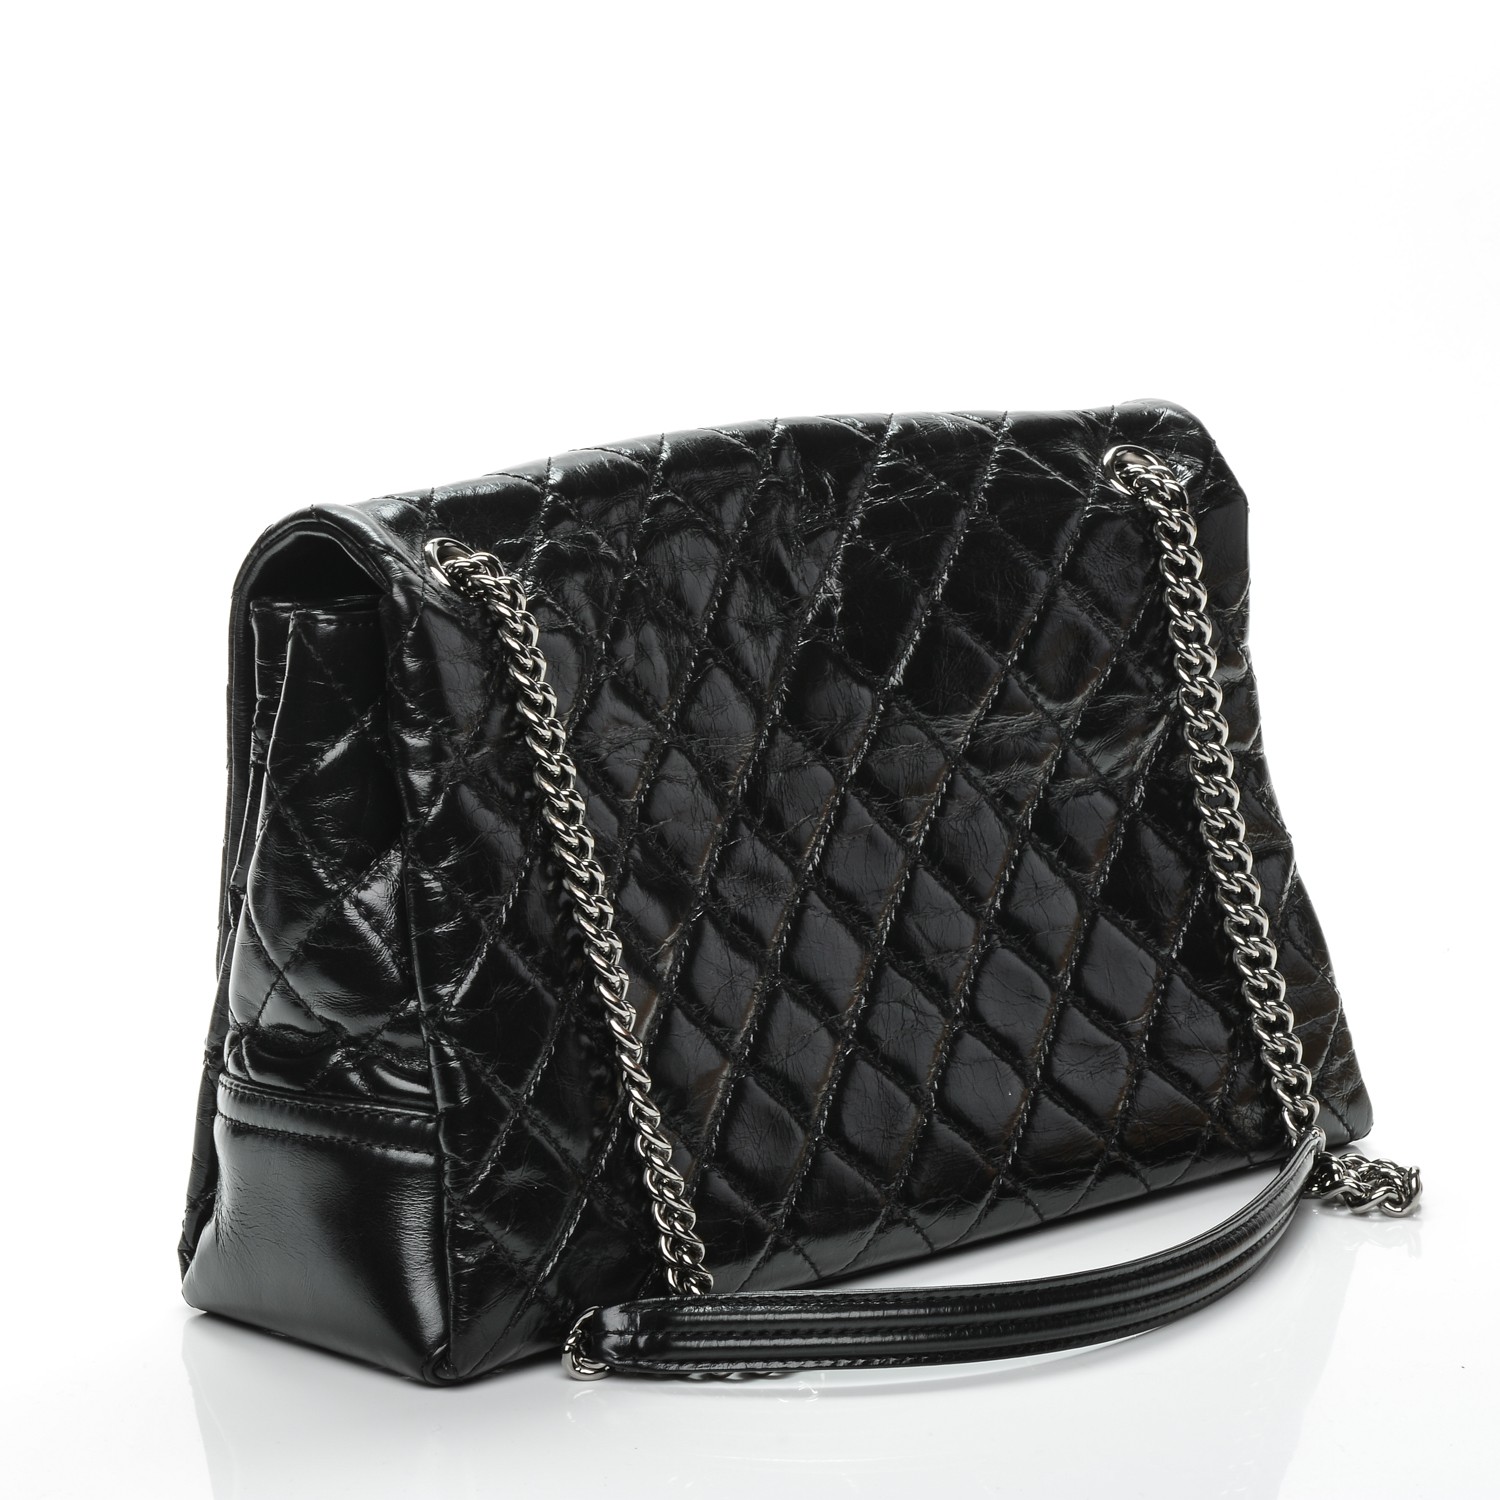 CHANEL Glazed Calfskin Quilted Large Lady Pearly Flap Black 194840